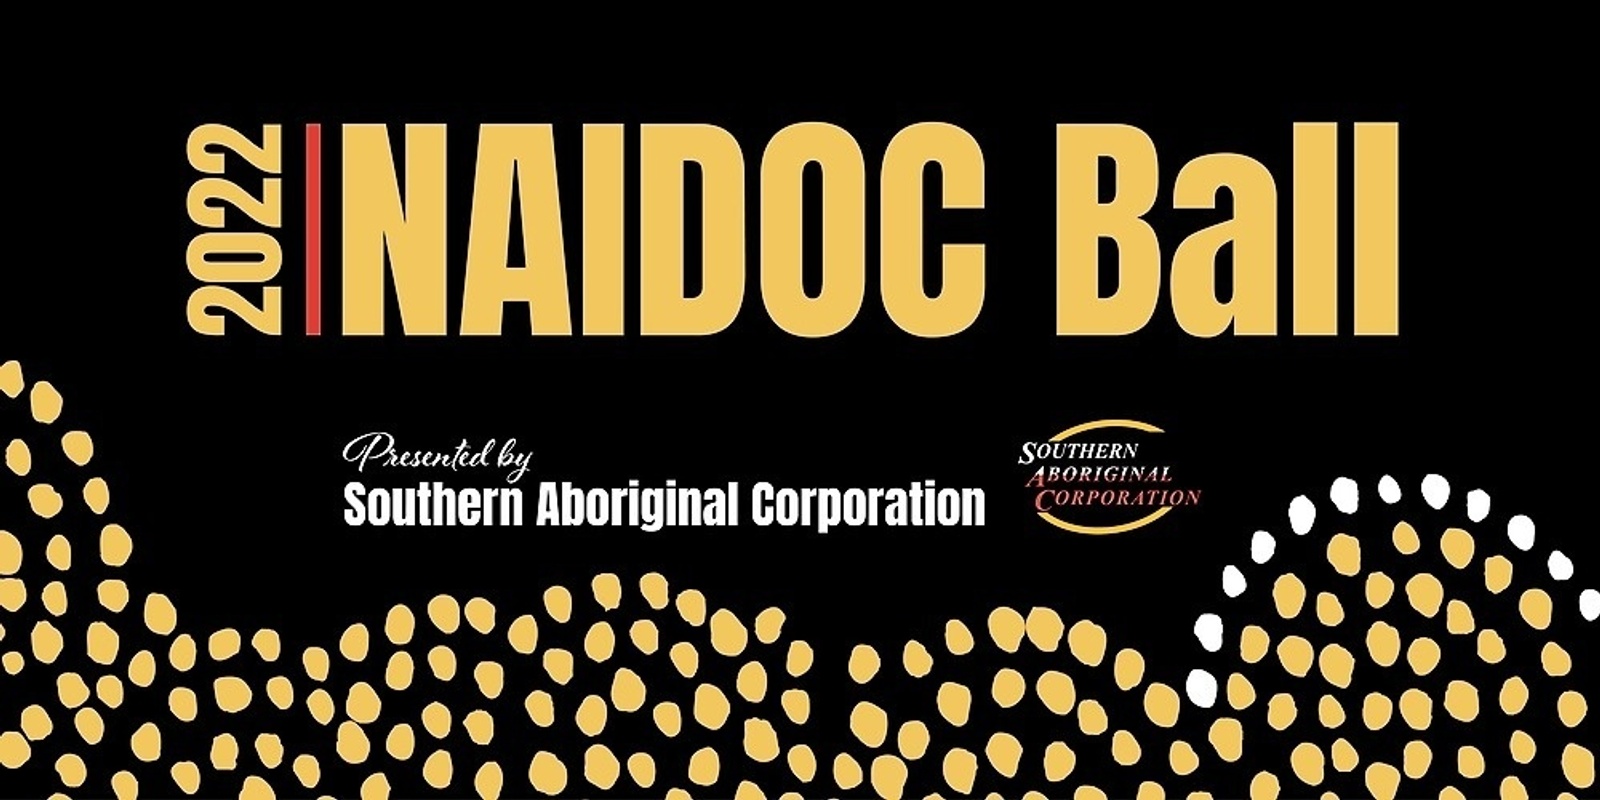 Banner image for 2022 NAIDOC Ball Presented by Southern Aboriginal Corporation